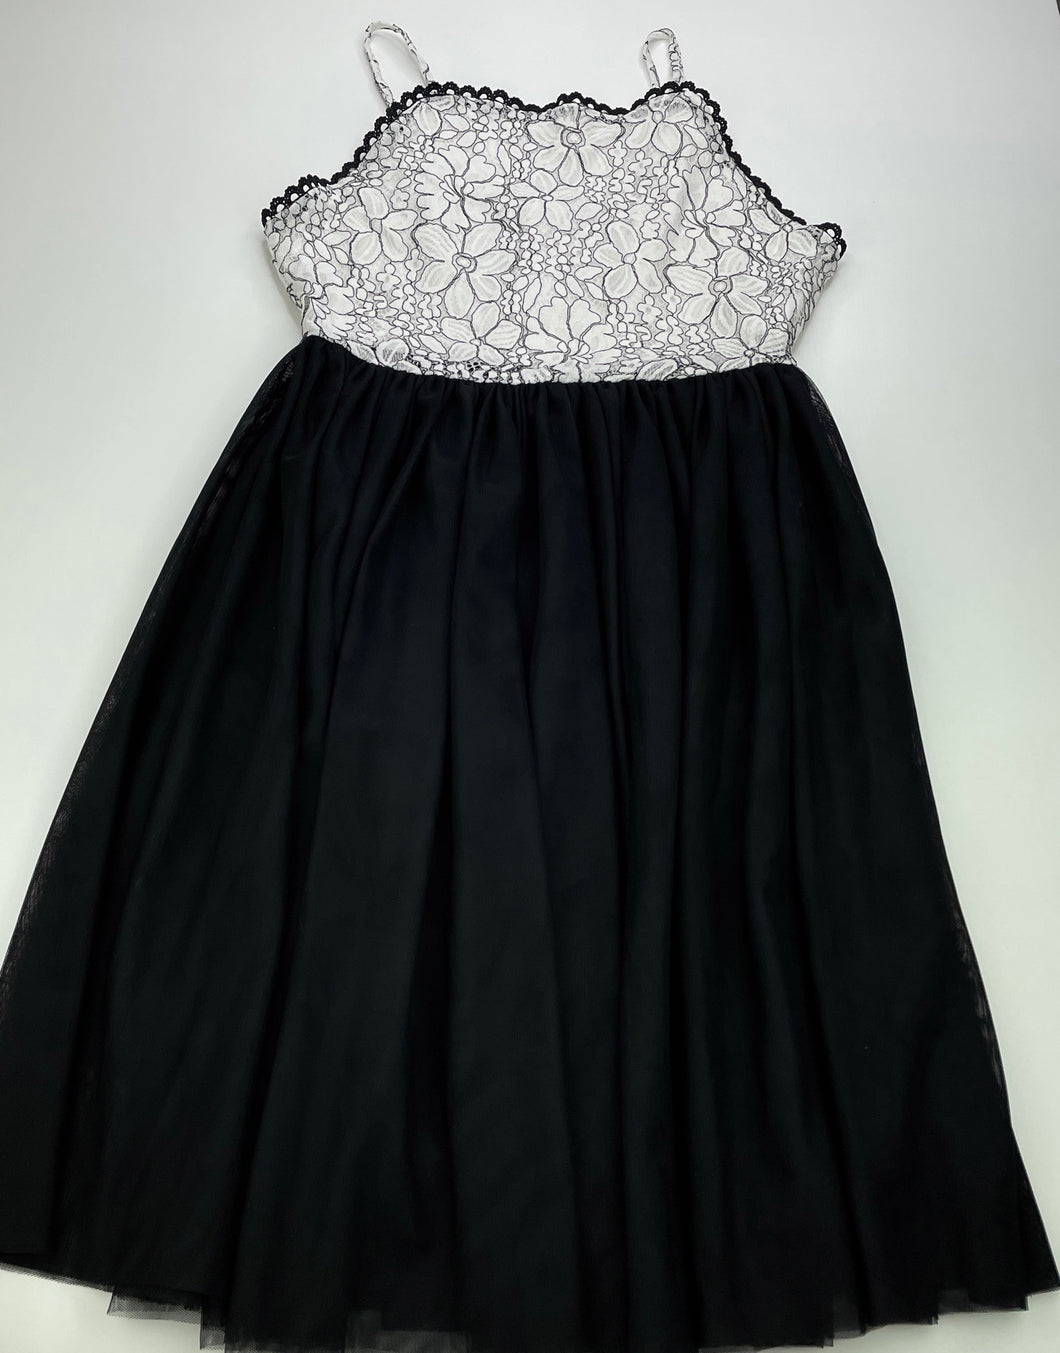 Girls KID, floral lace & tulle formal / party dress, GUC, size 16, L: 88cm